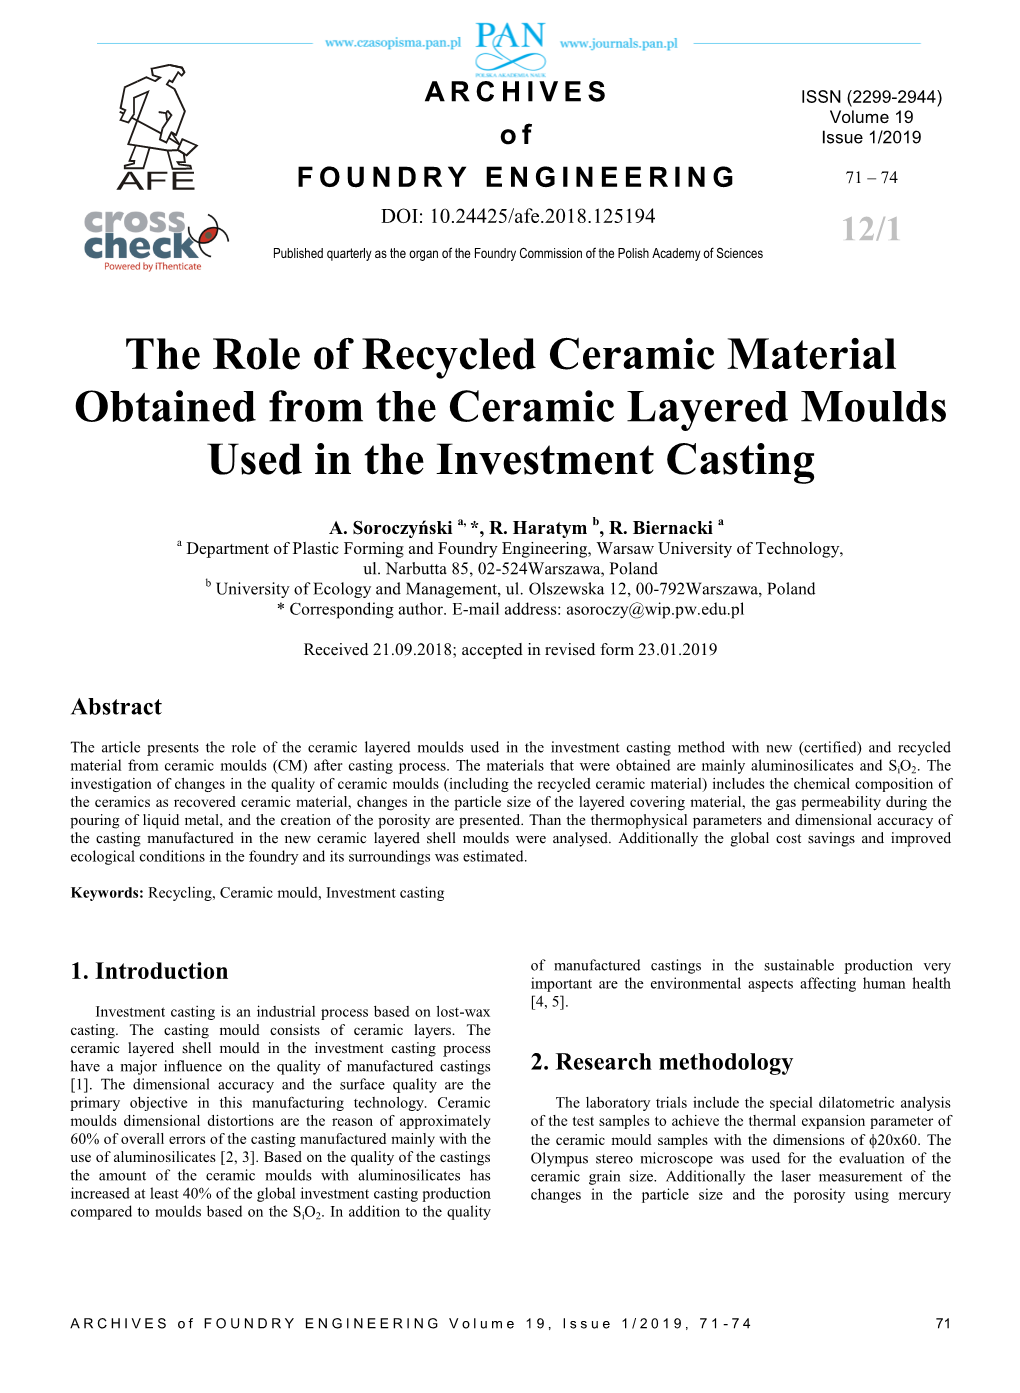 The Role of Recycled Ceramic Material Obtained from the Ceramic Layered Moulds Used in the Investment Casting